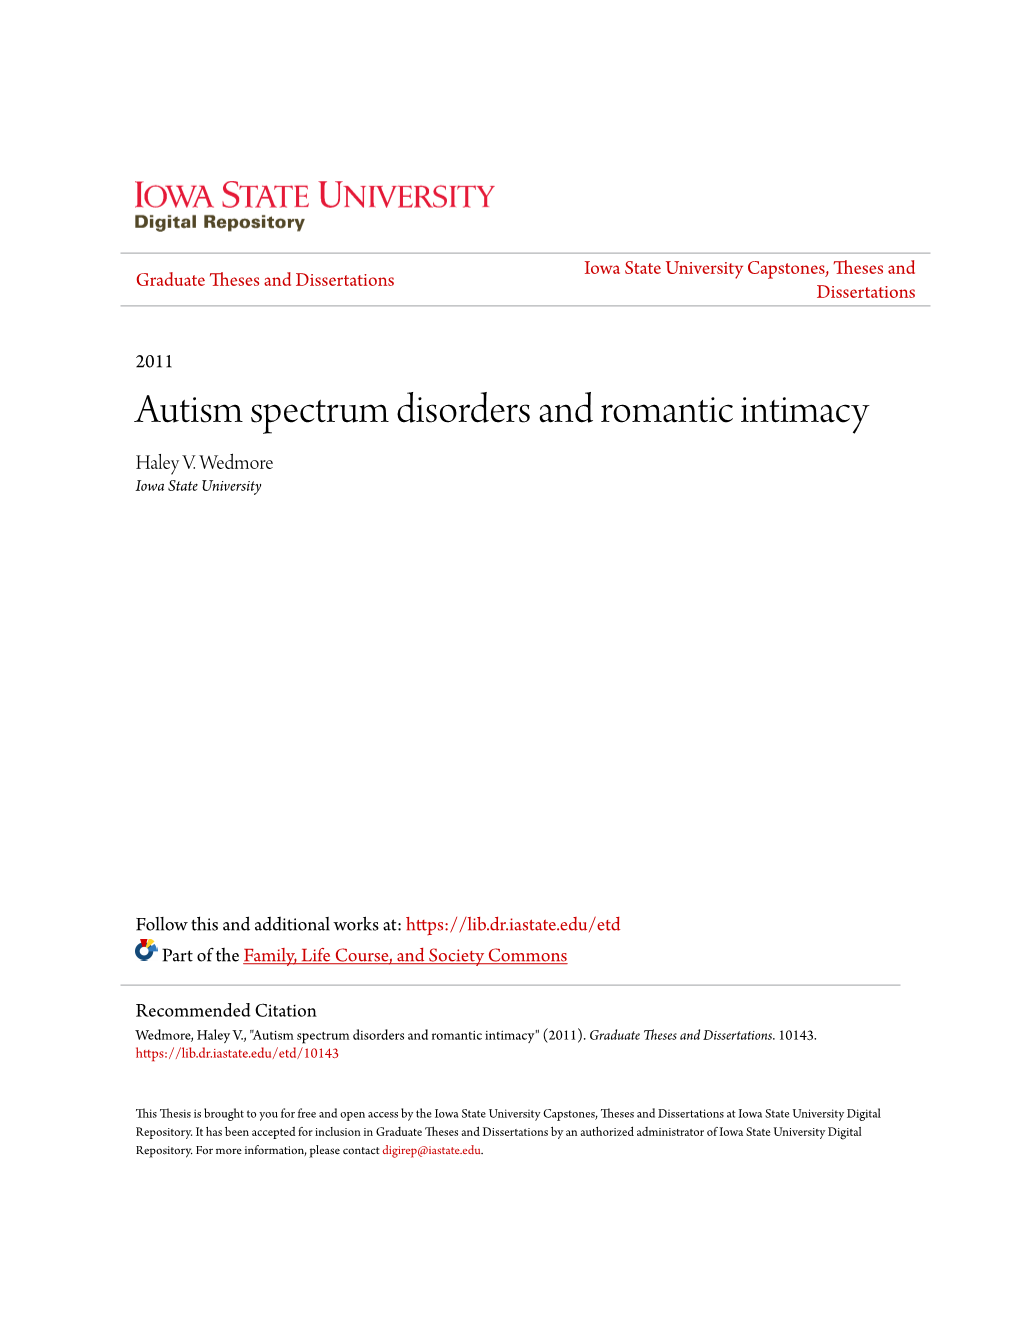 Autism Spectrum Disorders and Romantic Intimacy Haley V